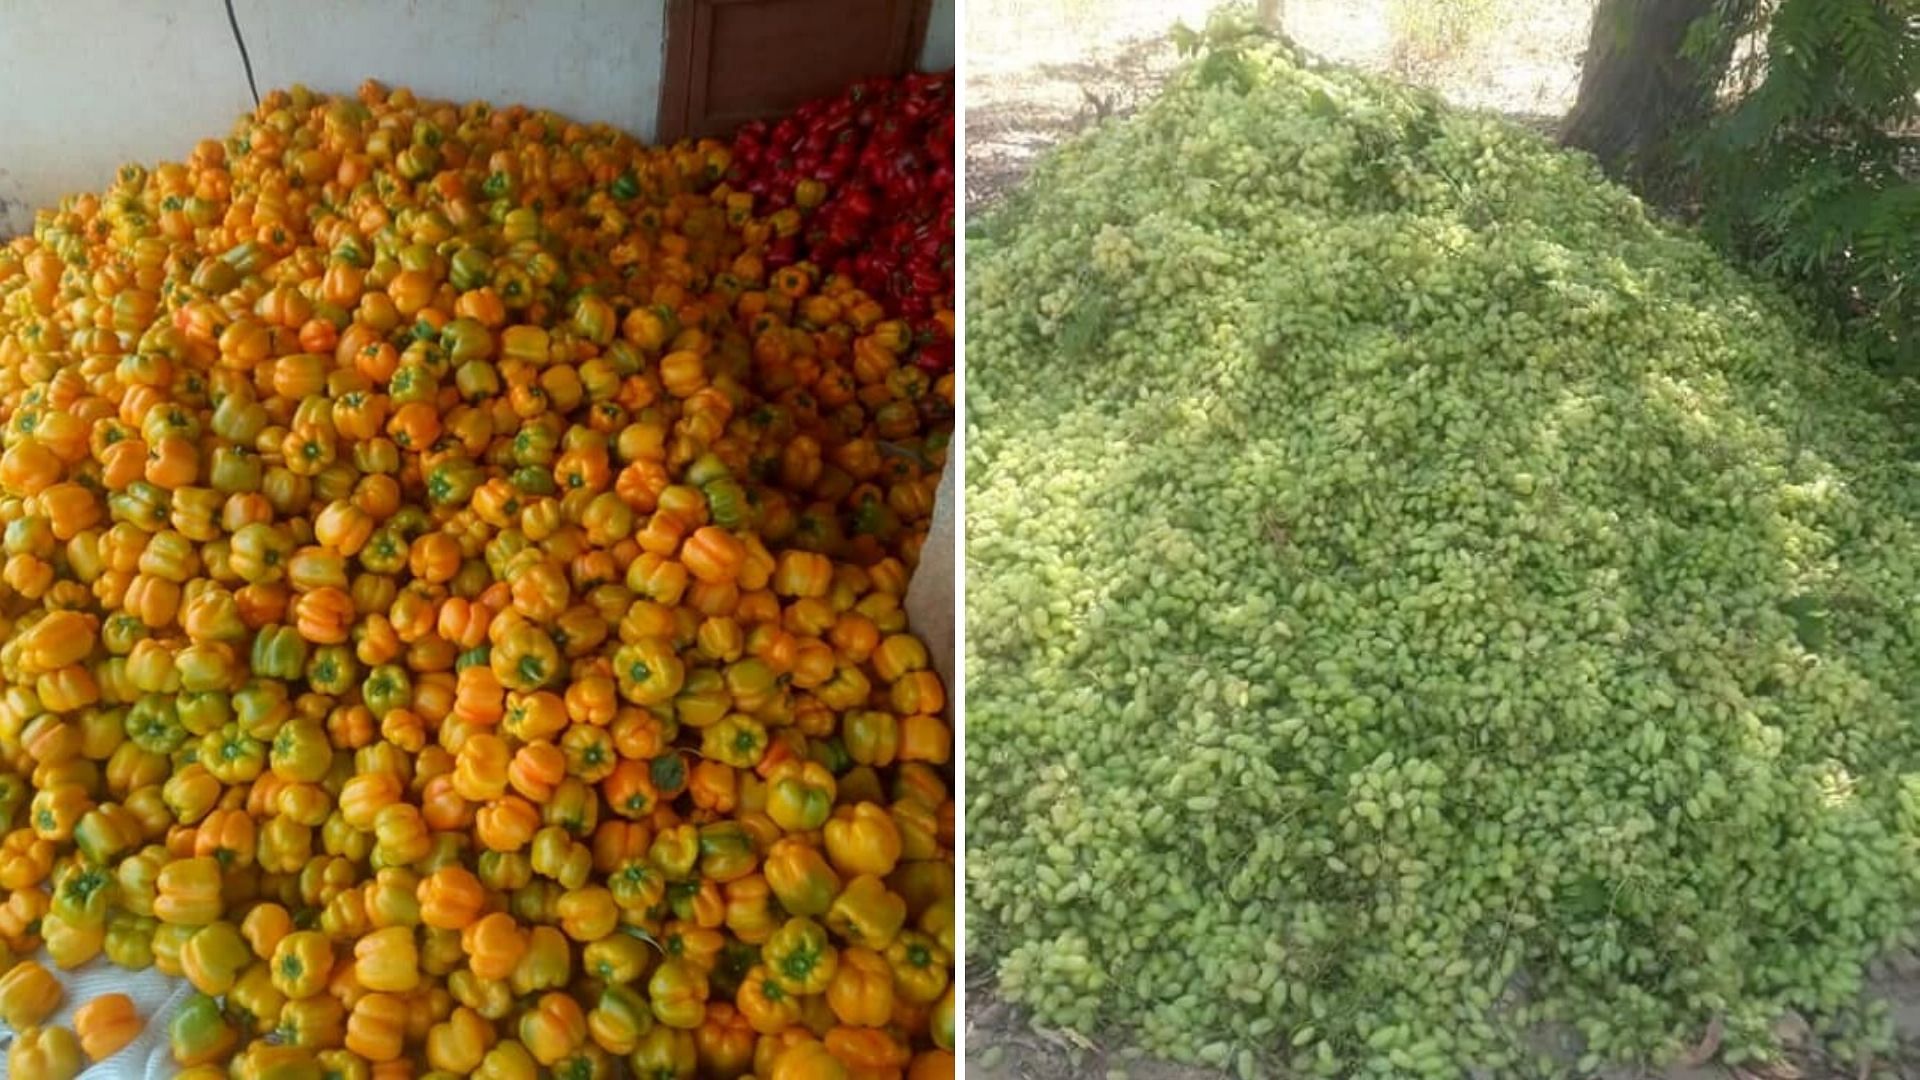 Several farmers in Karnataka are facing trying times due to the snapping of the supply chain that has forced several of them to dump their produce, unable to find the means to transport them to the markets.